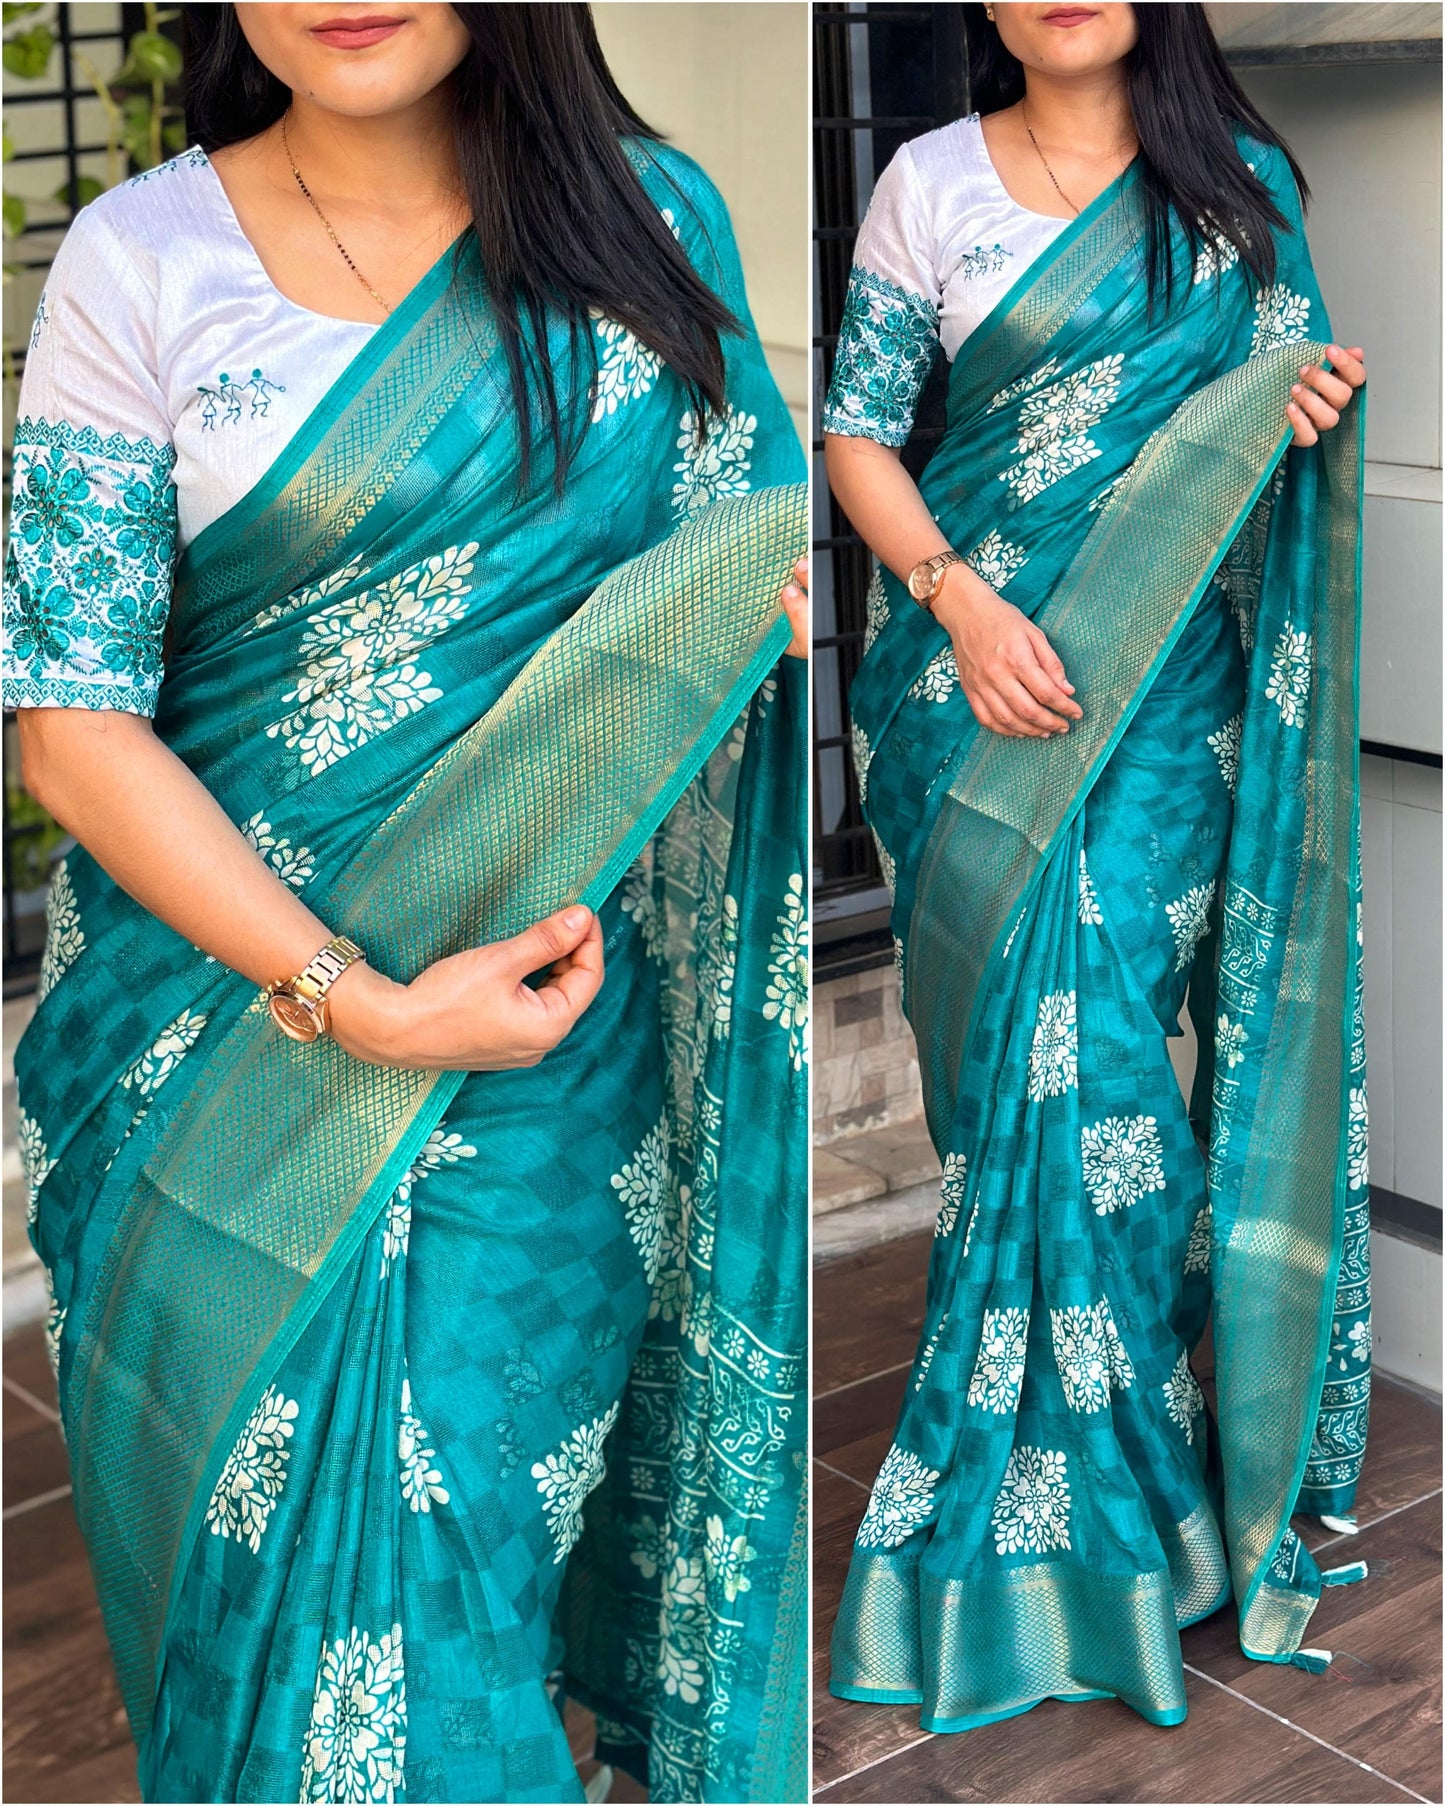 Women's Beautiful Checkered Floral  Printed Muslin Cotton Saree & Embroidered Blouse Ensemble"